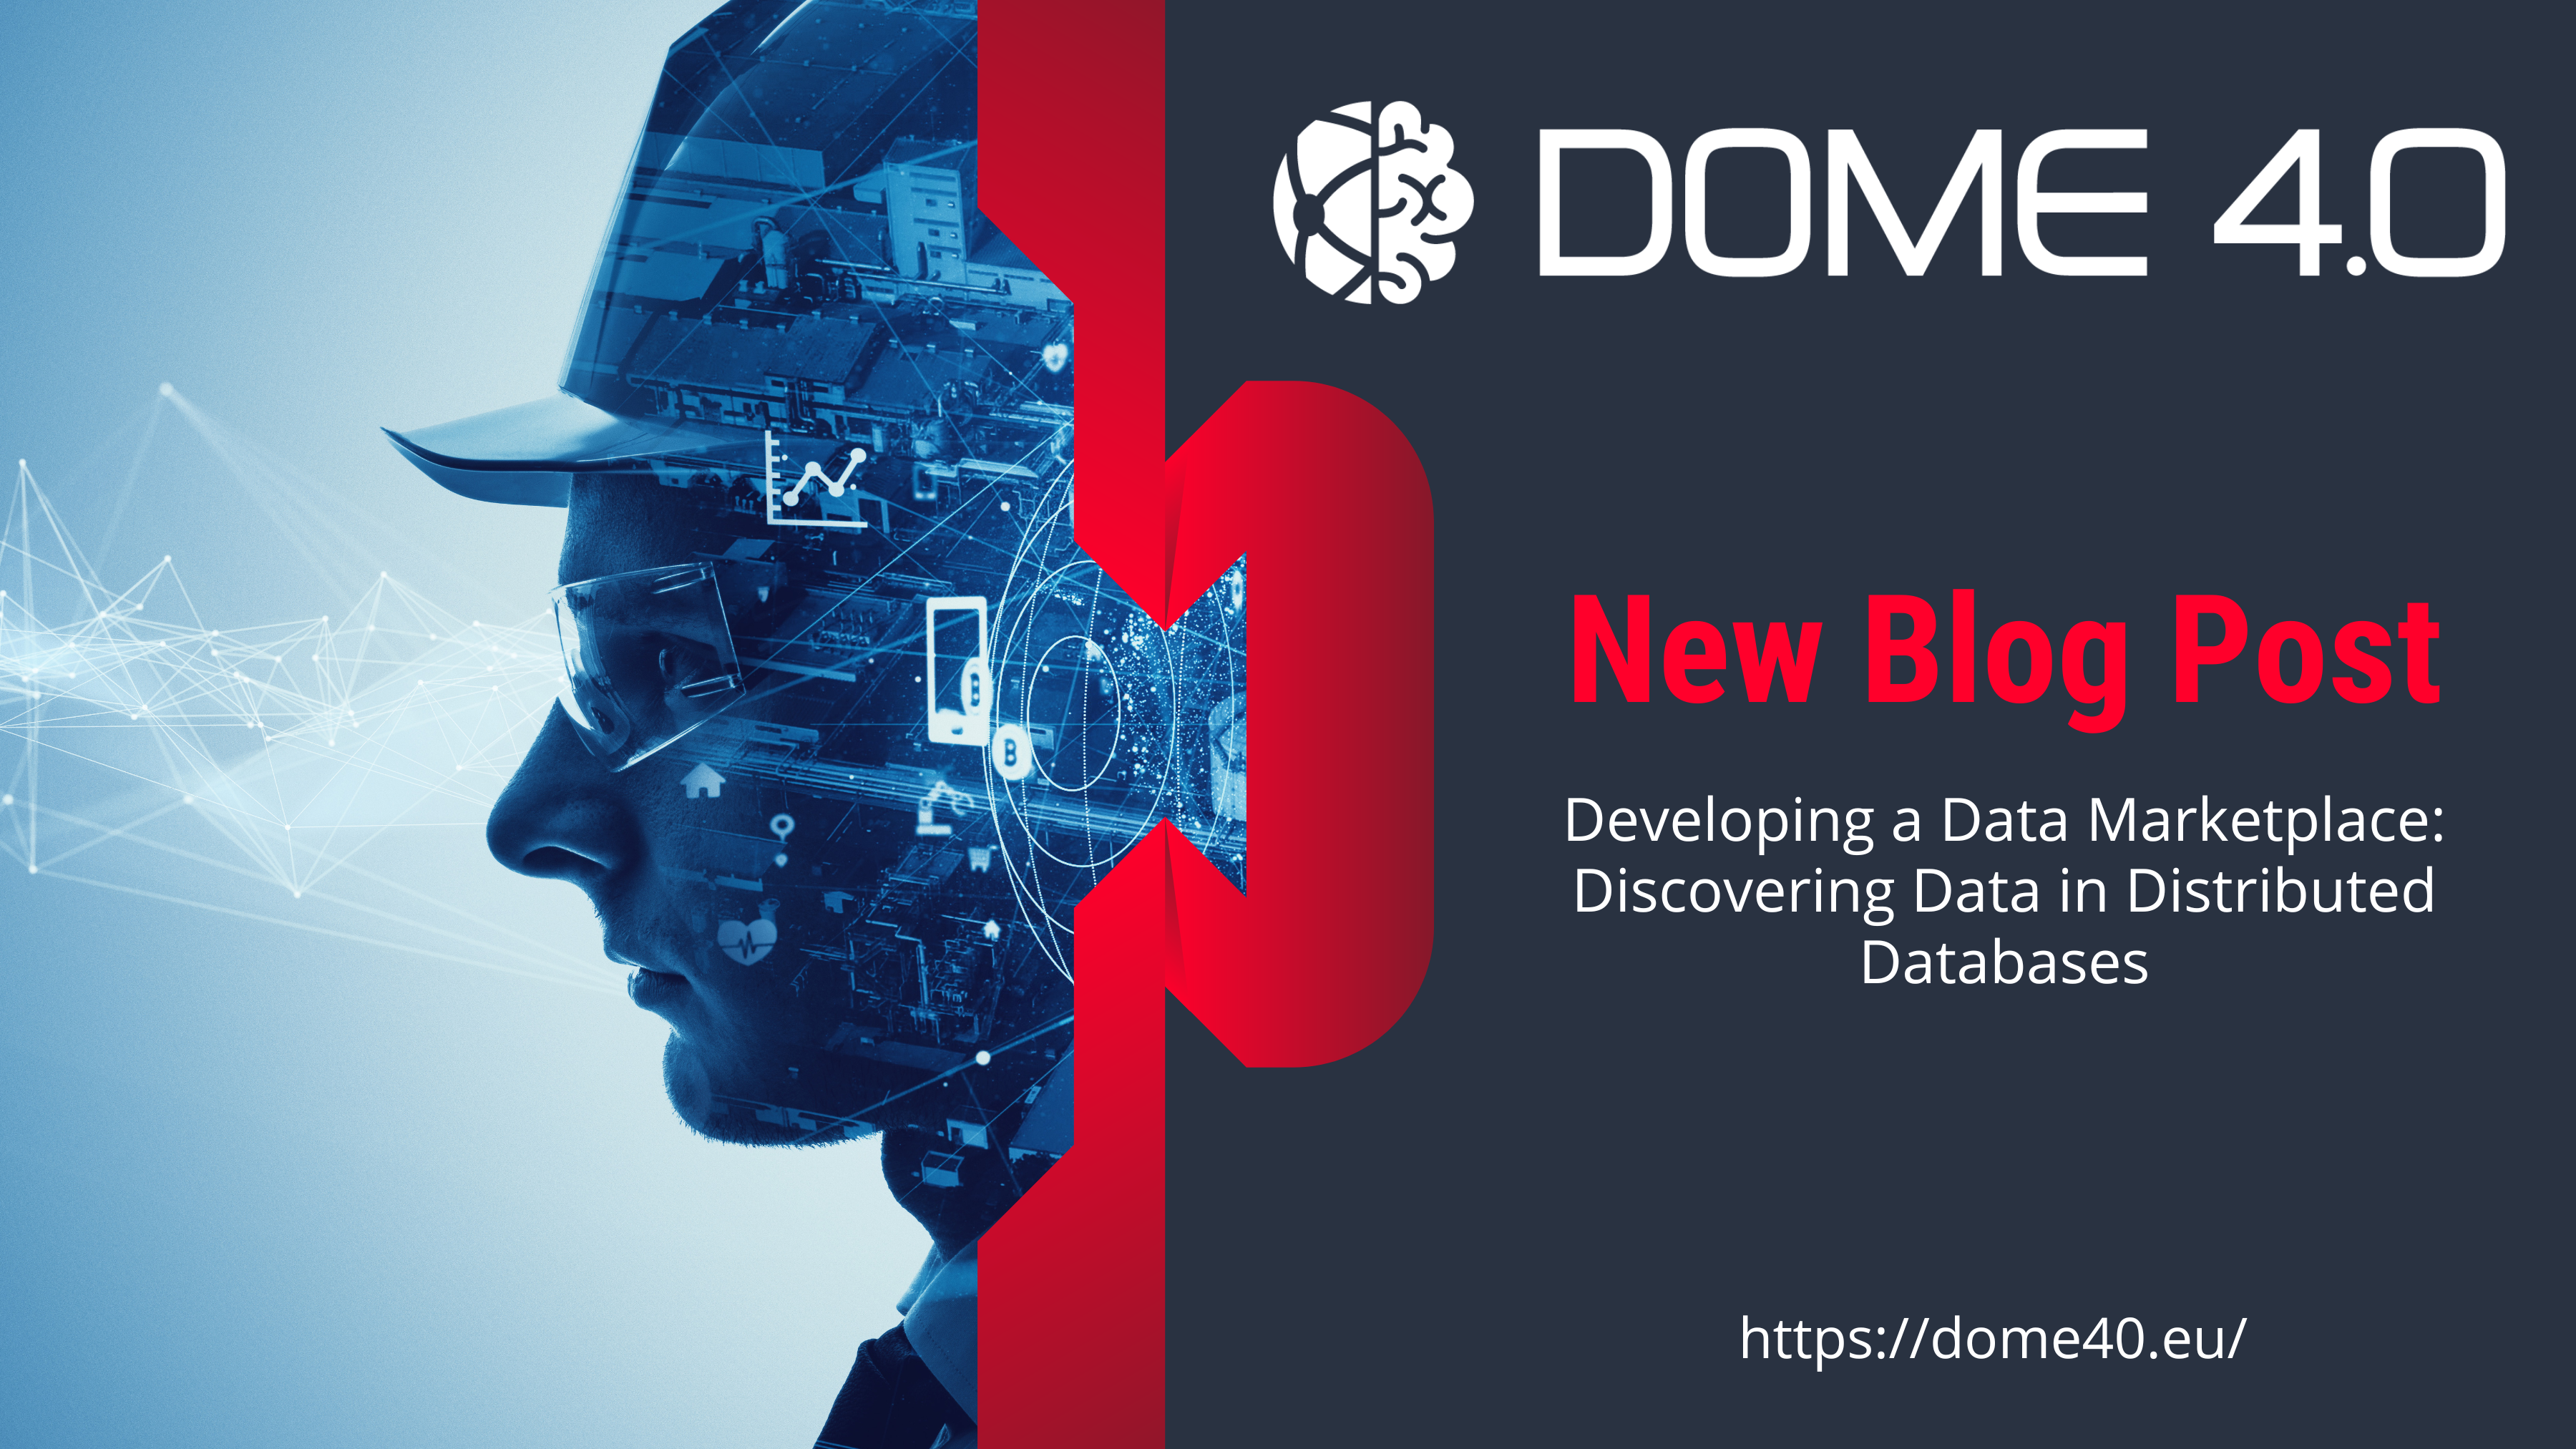 DOME 4.0: Developing a Data Marketplace: Discovering Data in Distributed Databases